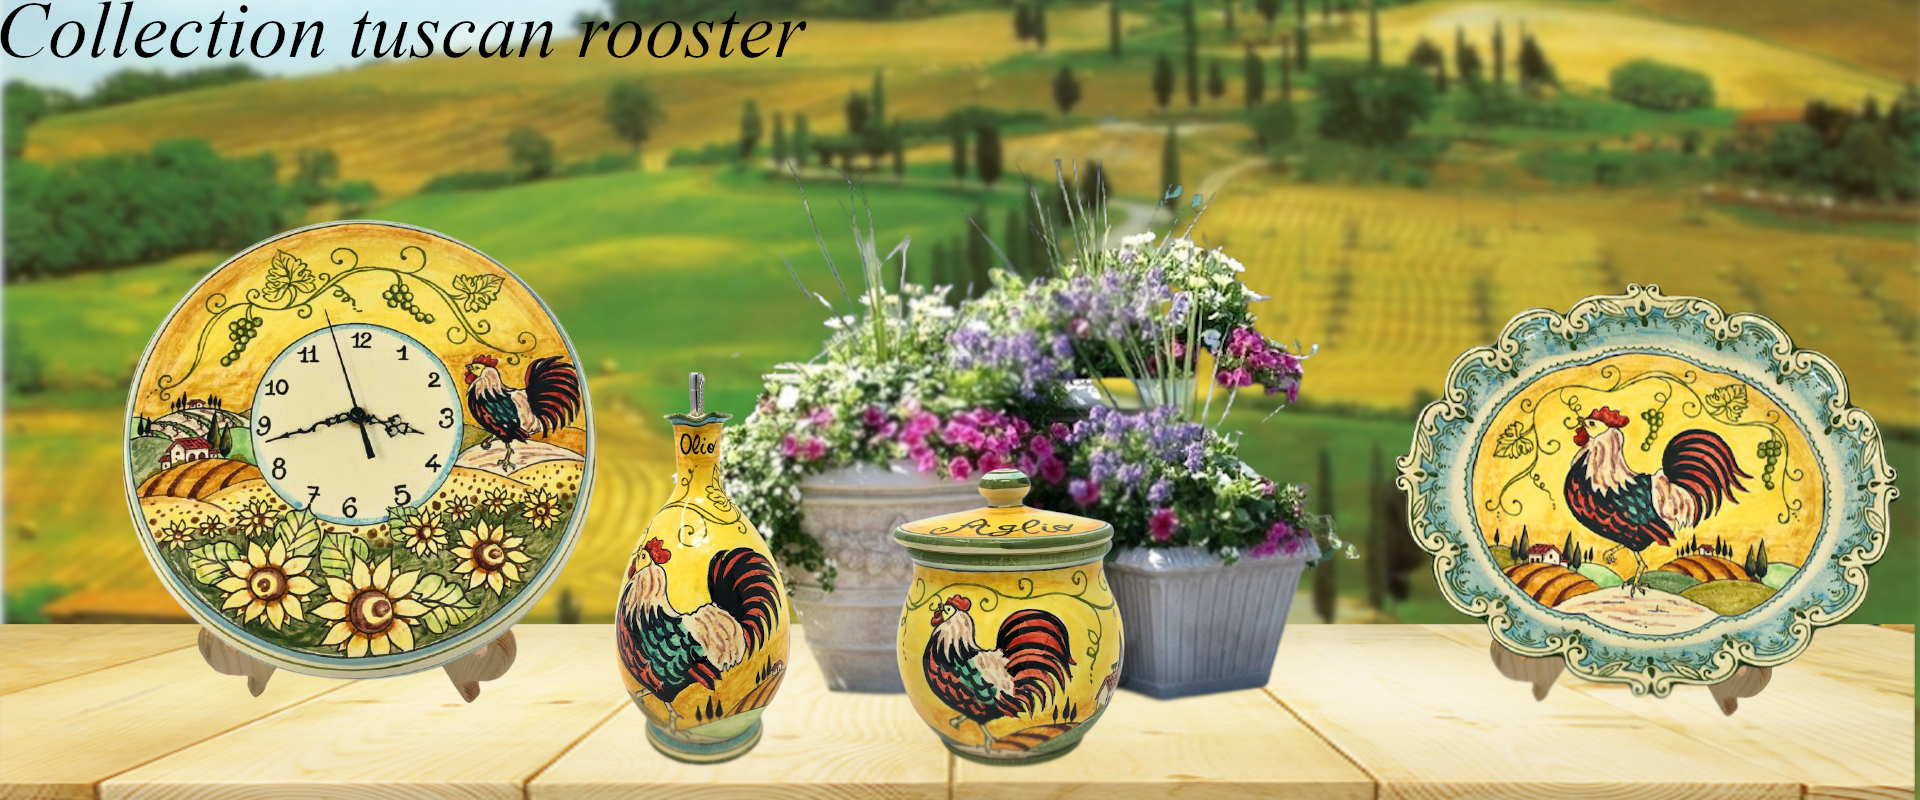 tuscan rooster